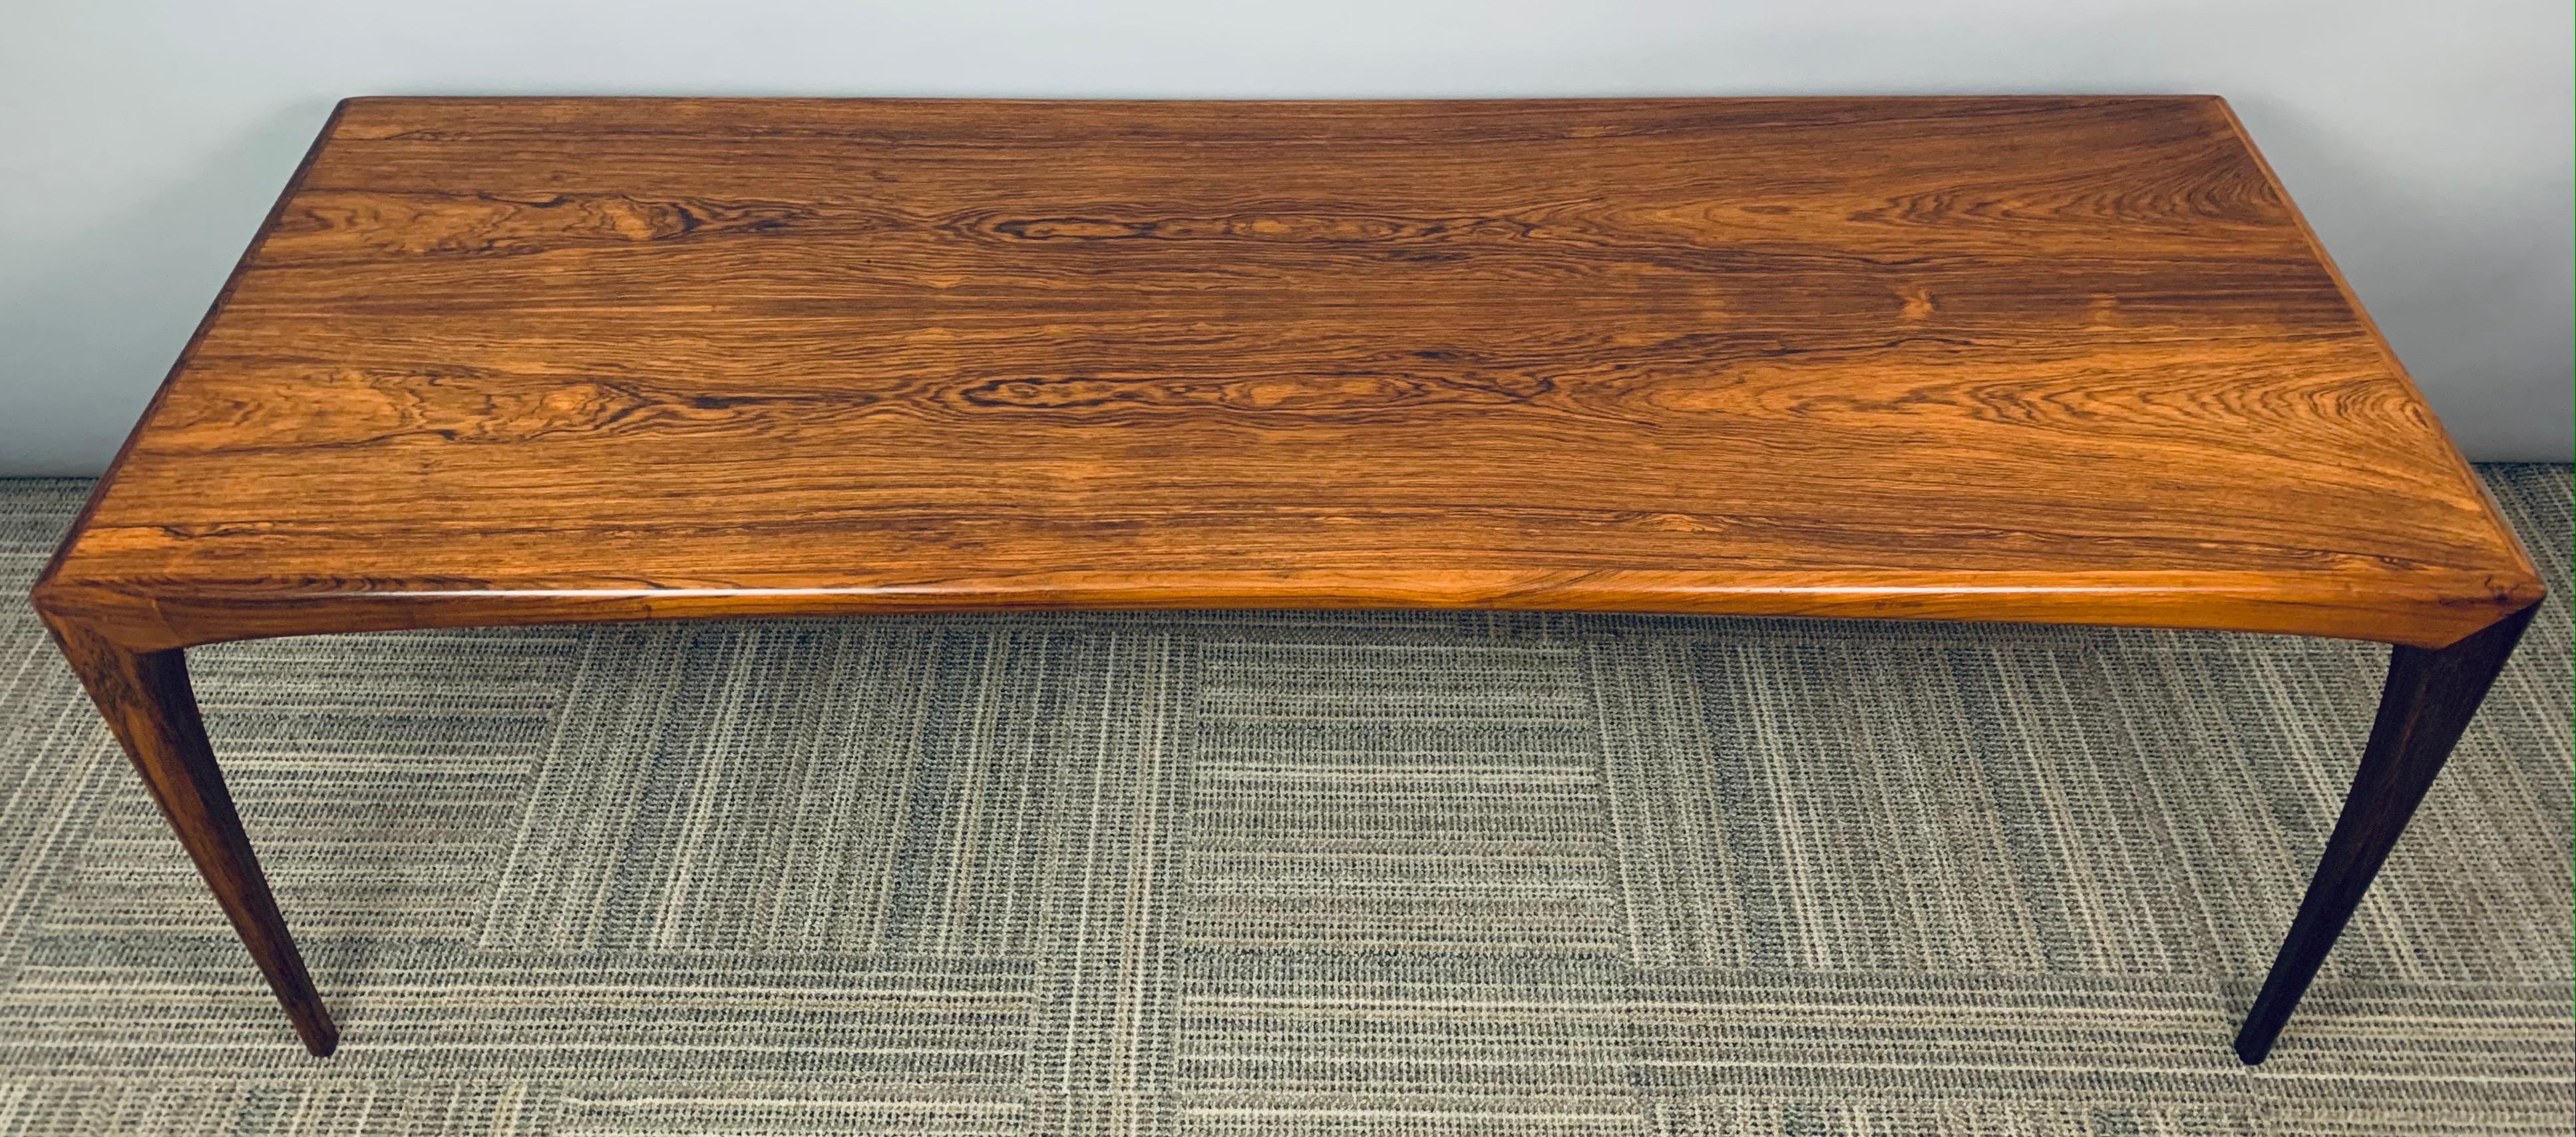 1960s midcentury rosewood coffee table designed by Danish designer Erling Torvits and manufactured by Heltborg Møbler. A beautiful coffee table with feature sculpted solid rosewood legs and a wonderful deep grain patina on the top of the table. In